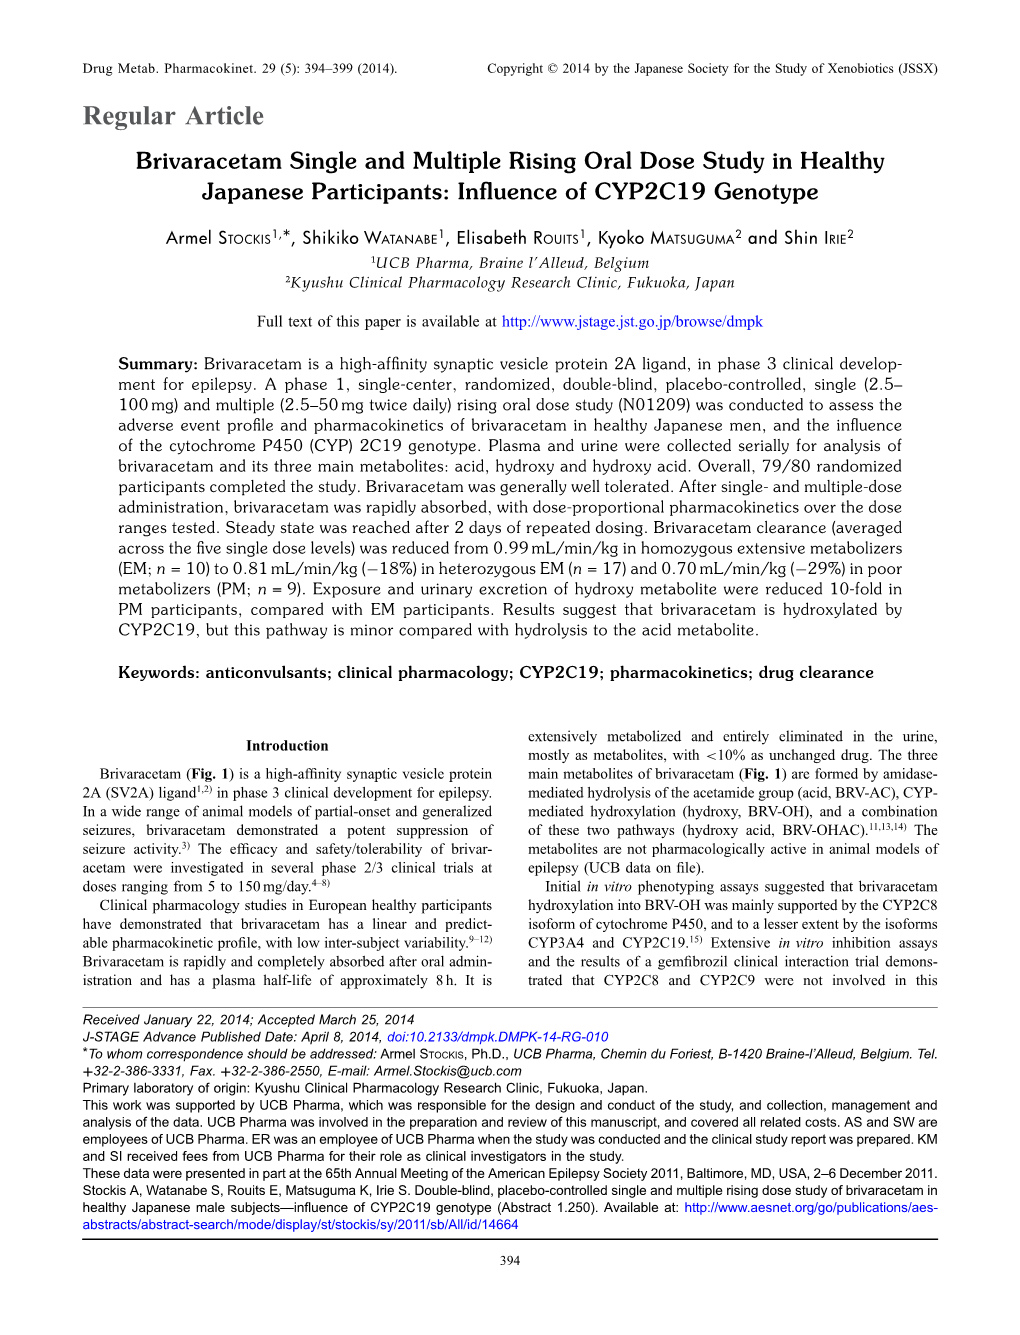 Brivaracetam Single and Multiple Rising Oral Dose Study in Healthy Japanese Participants: Inﬂuence of CYP2C19 Genotype